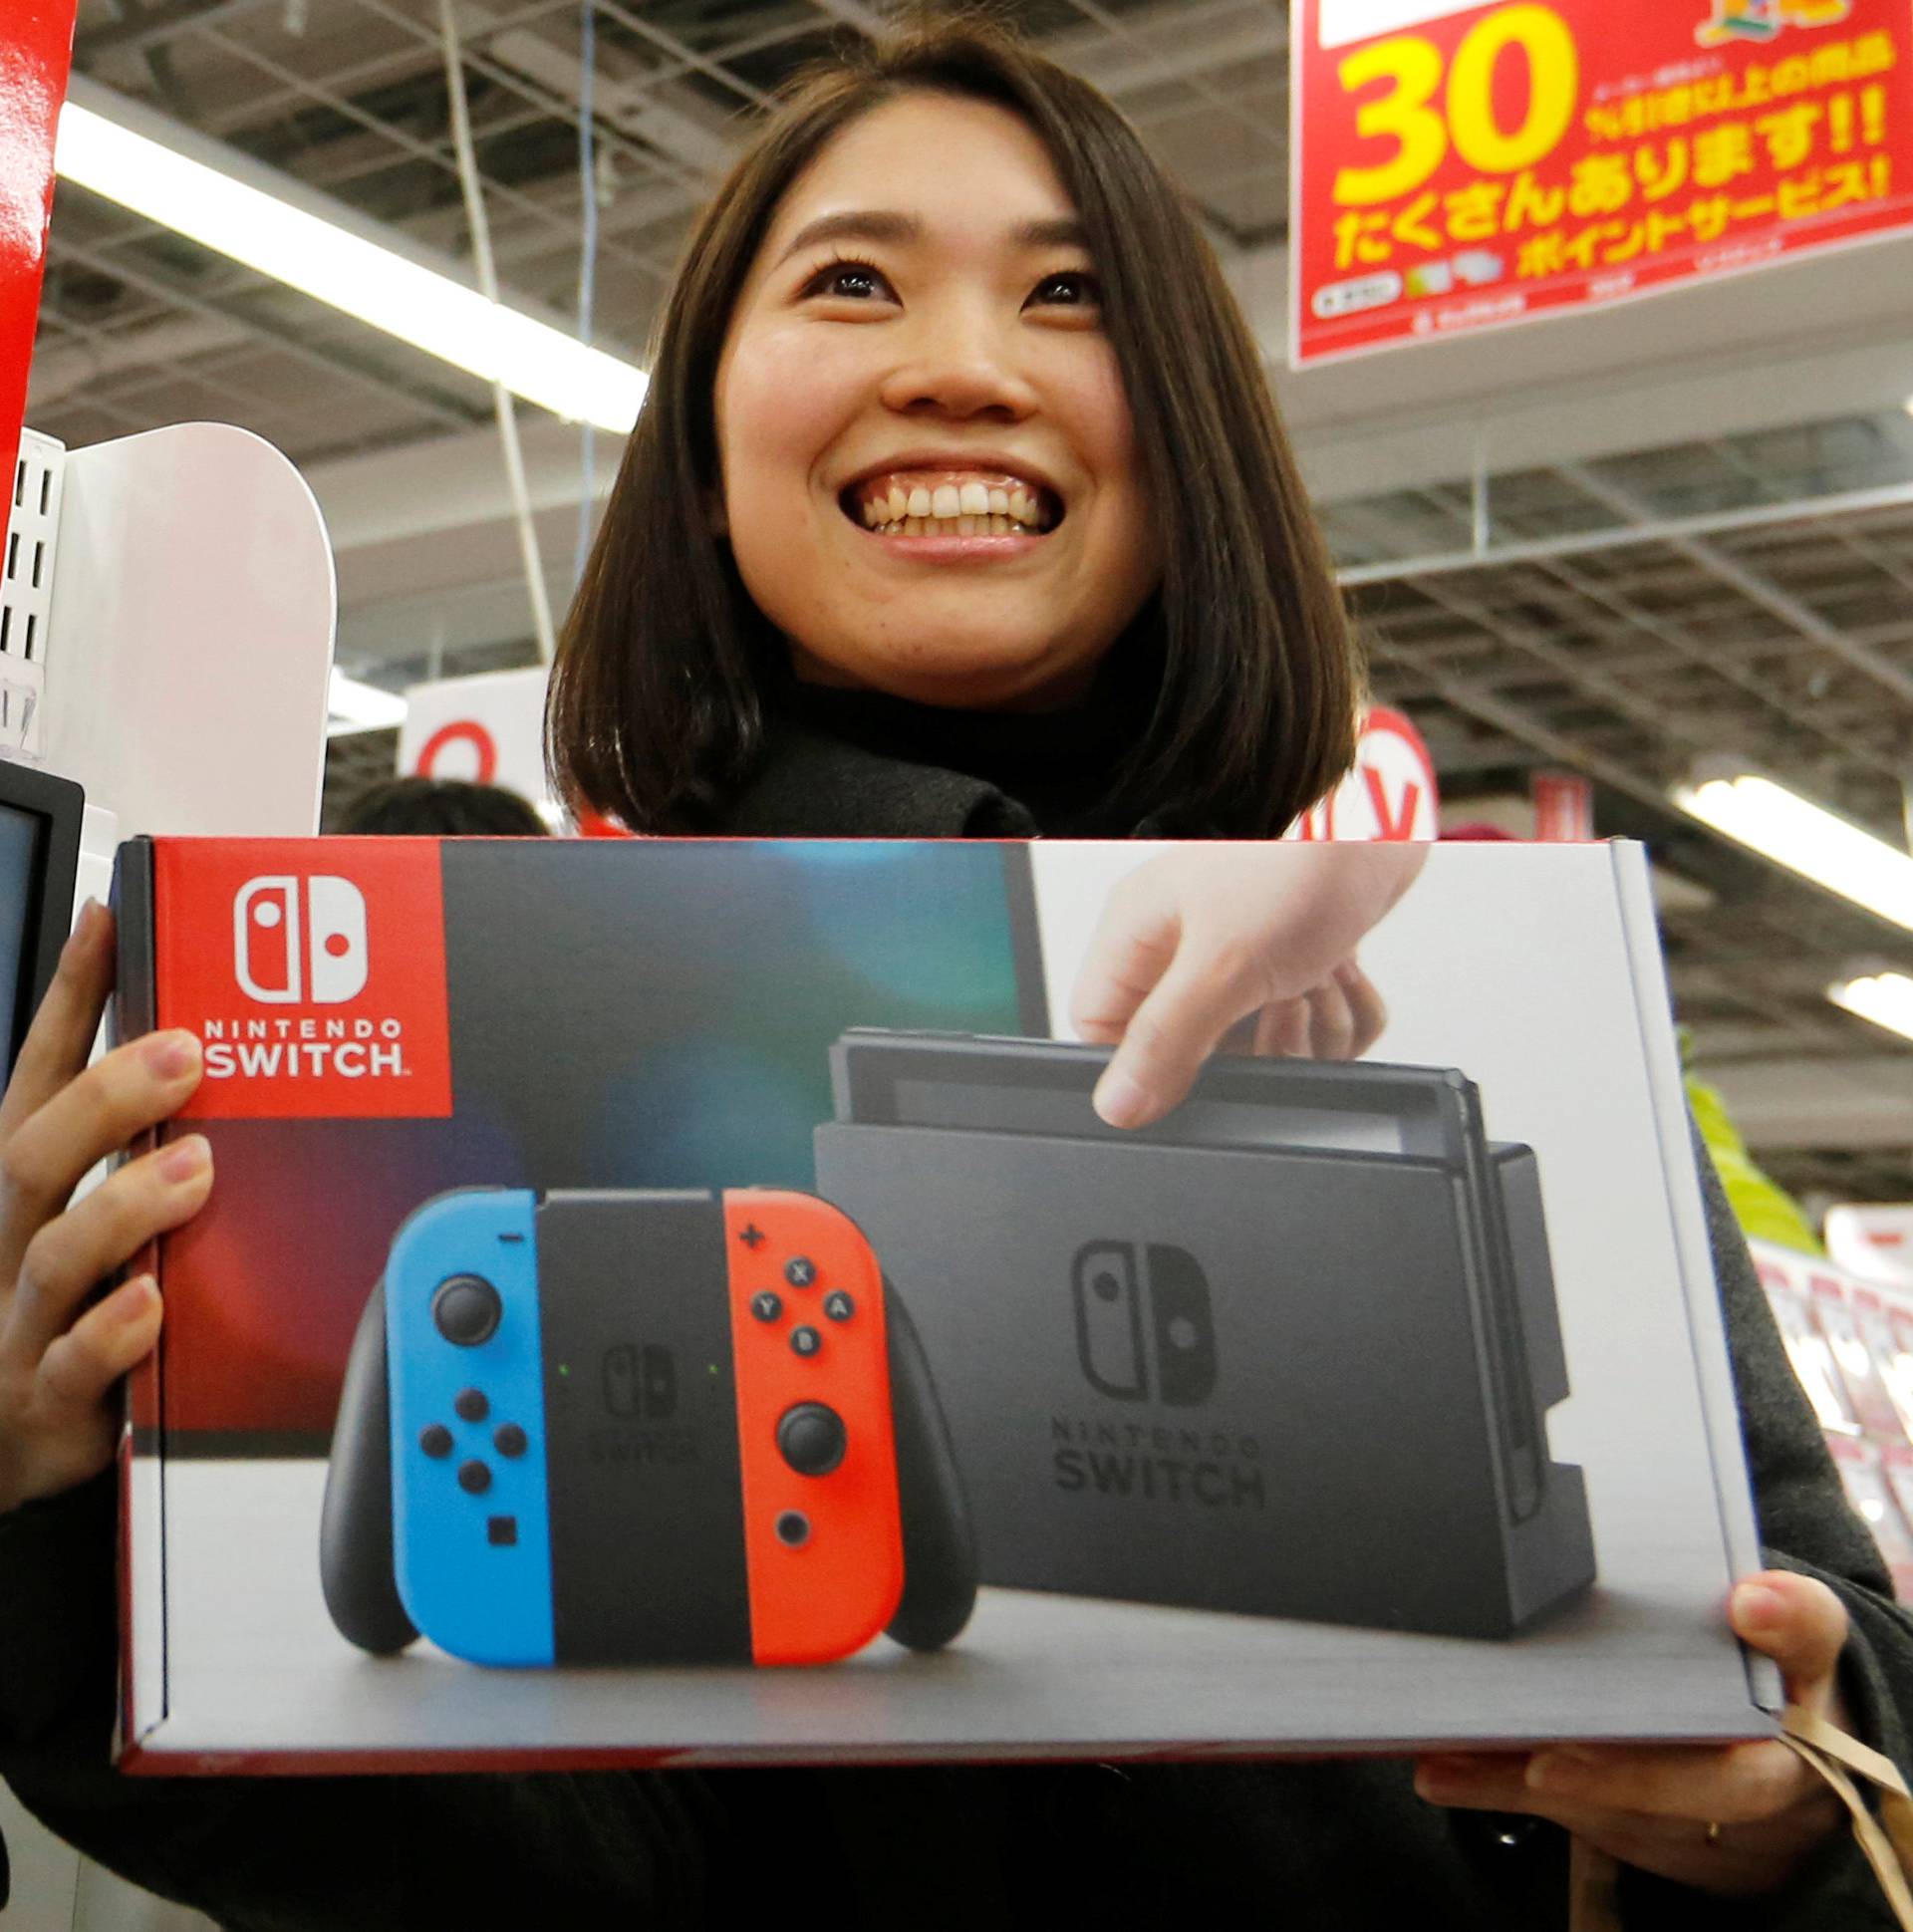 Nao Imoto smiles as she poses with her Nintendo Switch game console after buying it at an electronics store in Tokyo